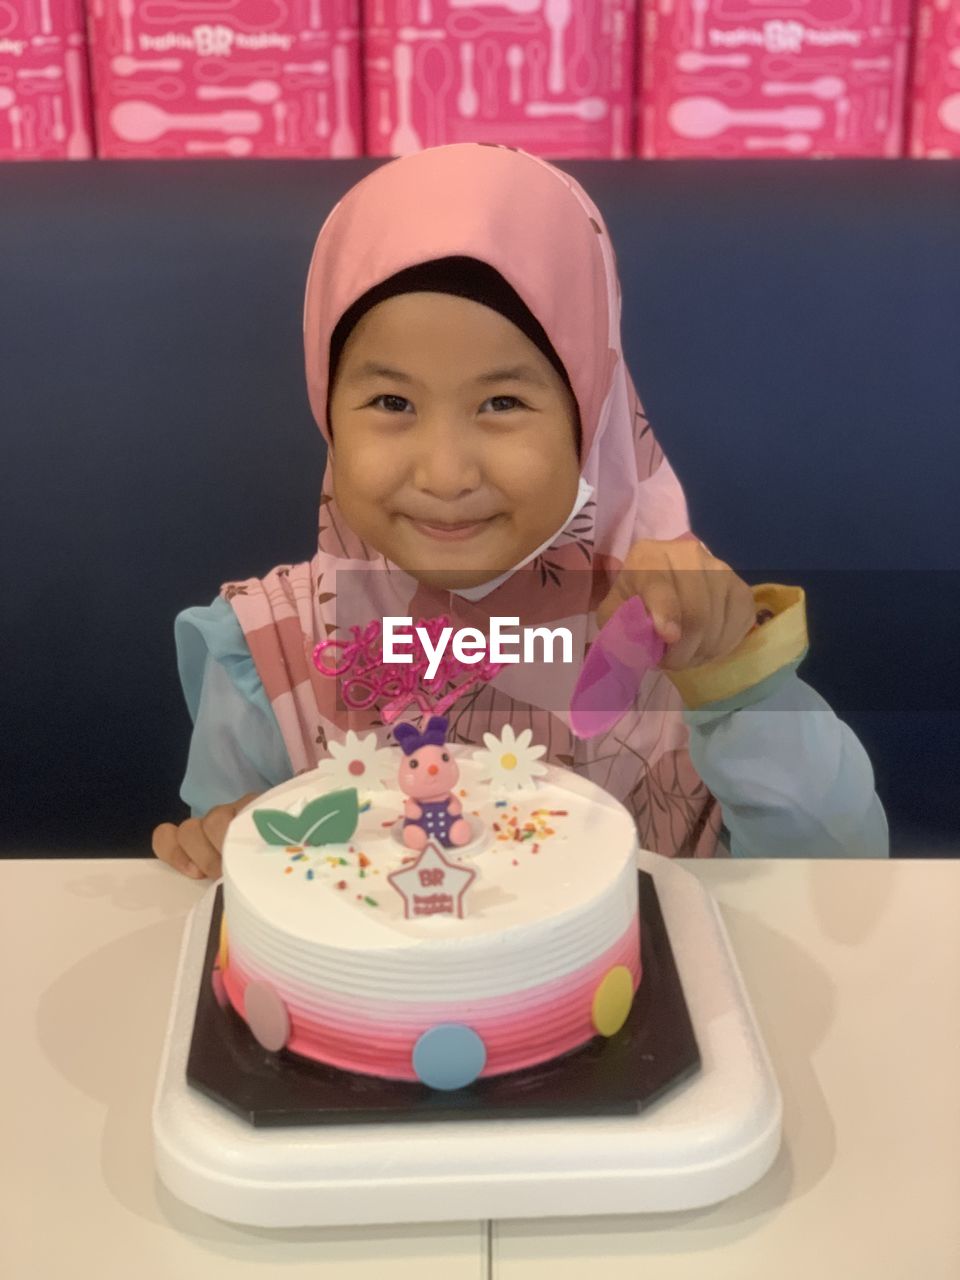 portrait, one person, pink, food, food and drink, smiling, child, birthday cake, looking at camera, childhood, women, sweet food, sweet, happiness, indoors, front view, dessert, celebration, emotion, event, female, cake, baked, waist up, cheerful, cute, birthday, table, holding, adult, headshot, clothing, baby, enjoyment, anniversary, lifestyles, positive emotion, party, toddler, person, innocence, freshness